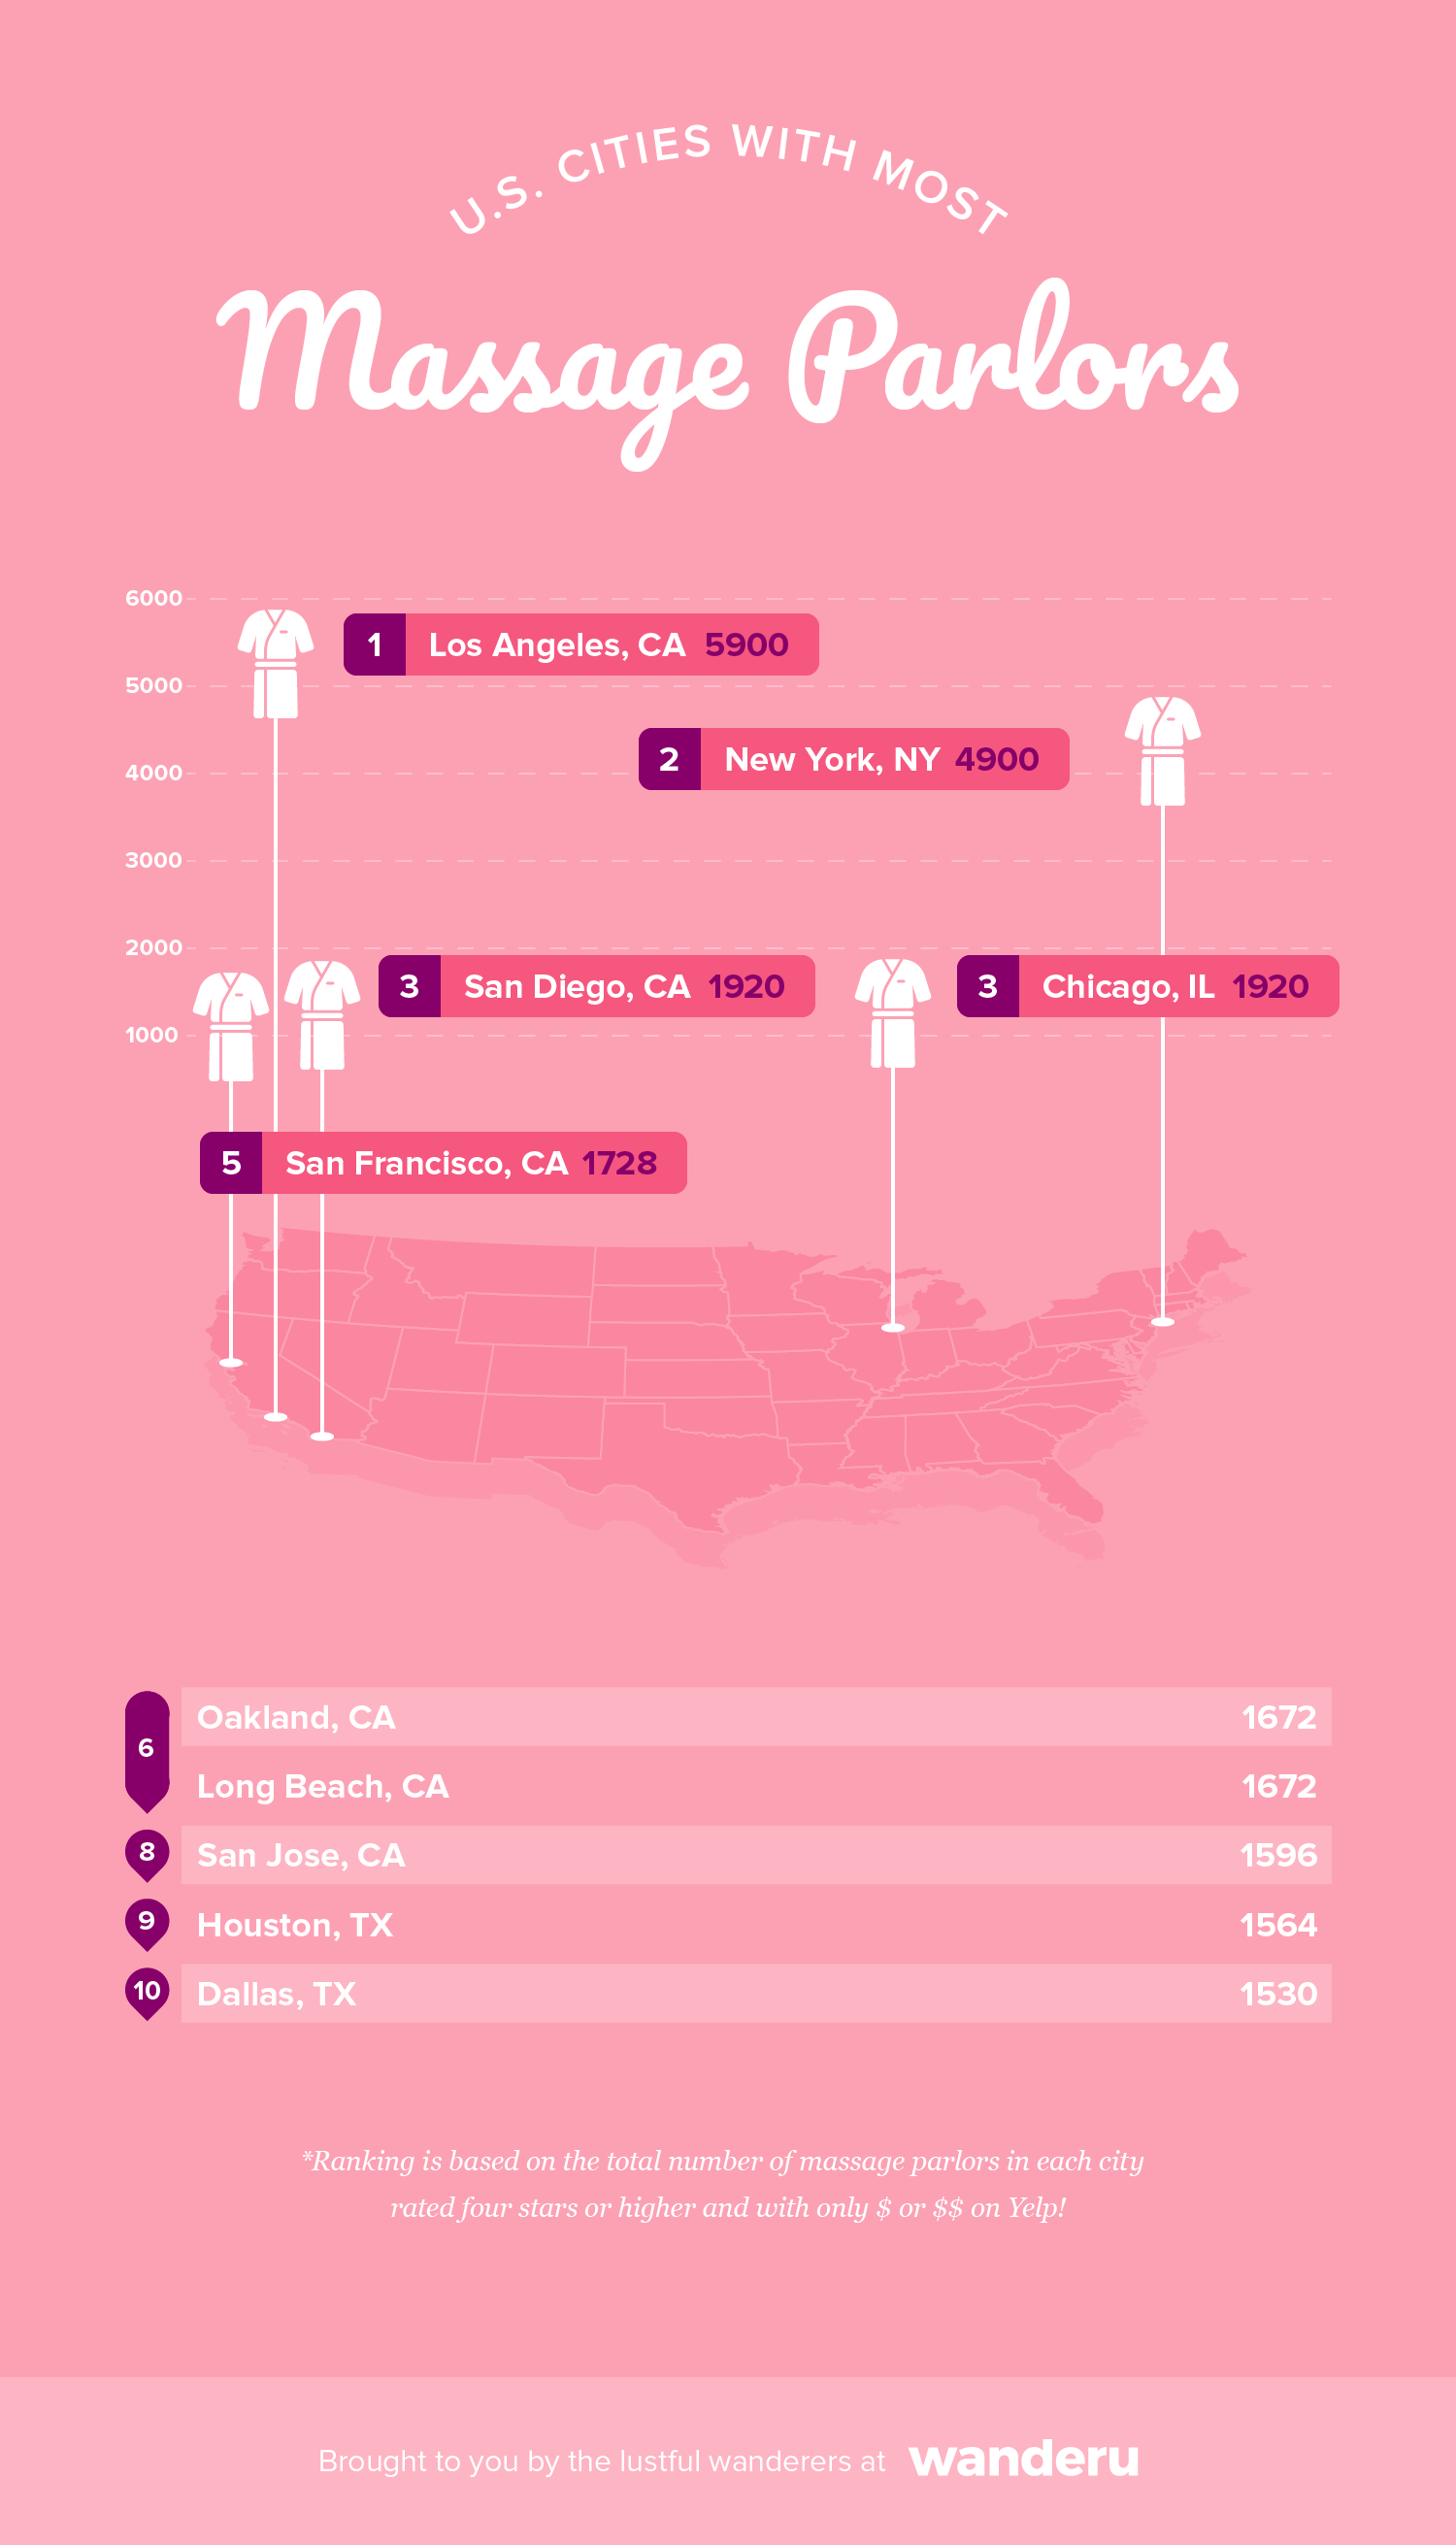 The graphic shows the top 10 cities in the U.S. with the most massage parlors.